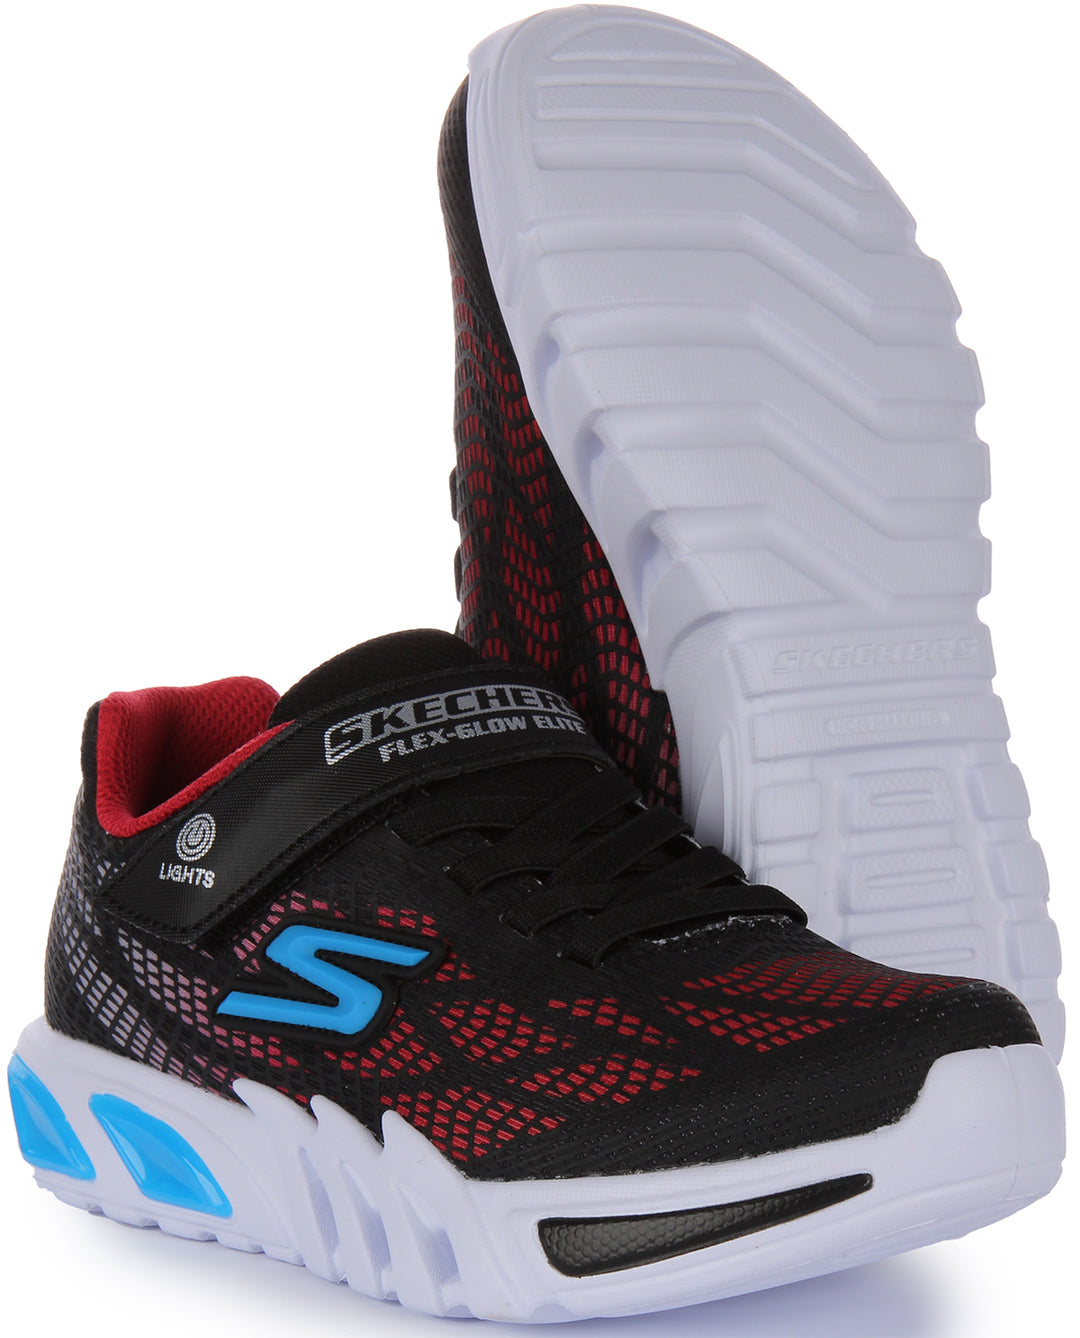 Elite 4feetshoes Black In Skechers – Kids Light Up Glow Flex Trainers Red | For